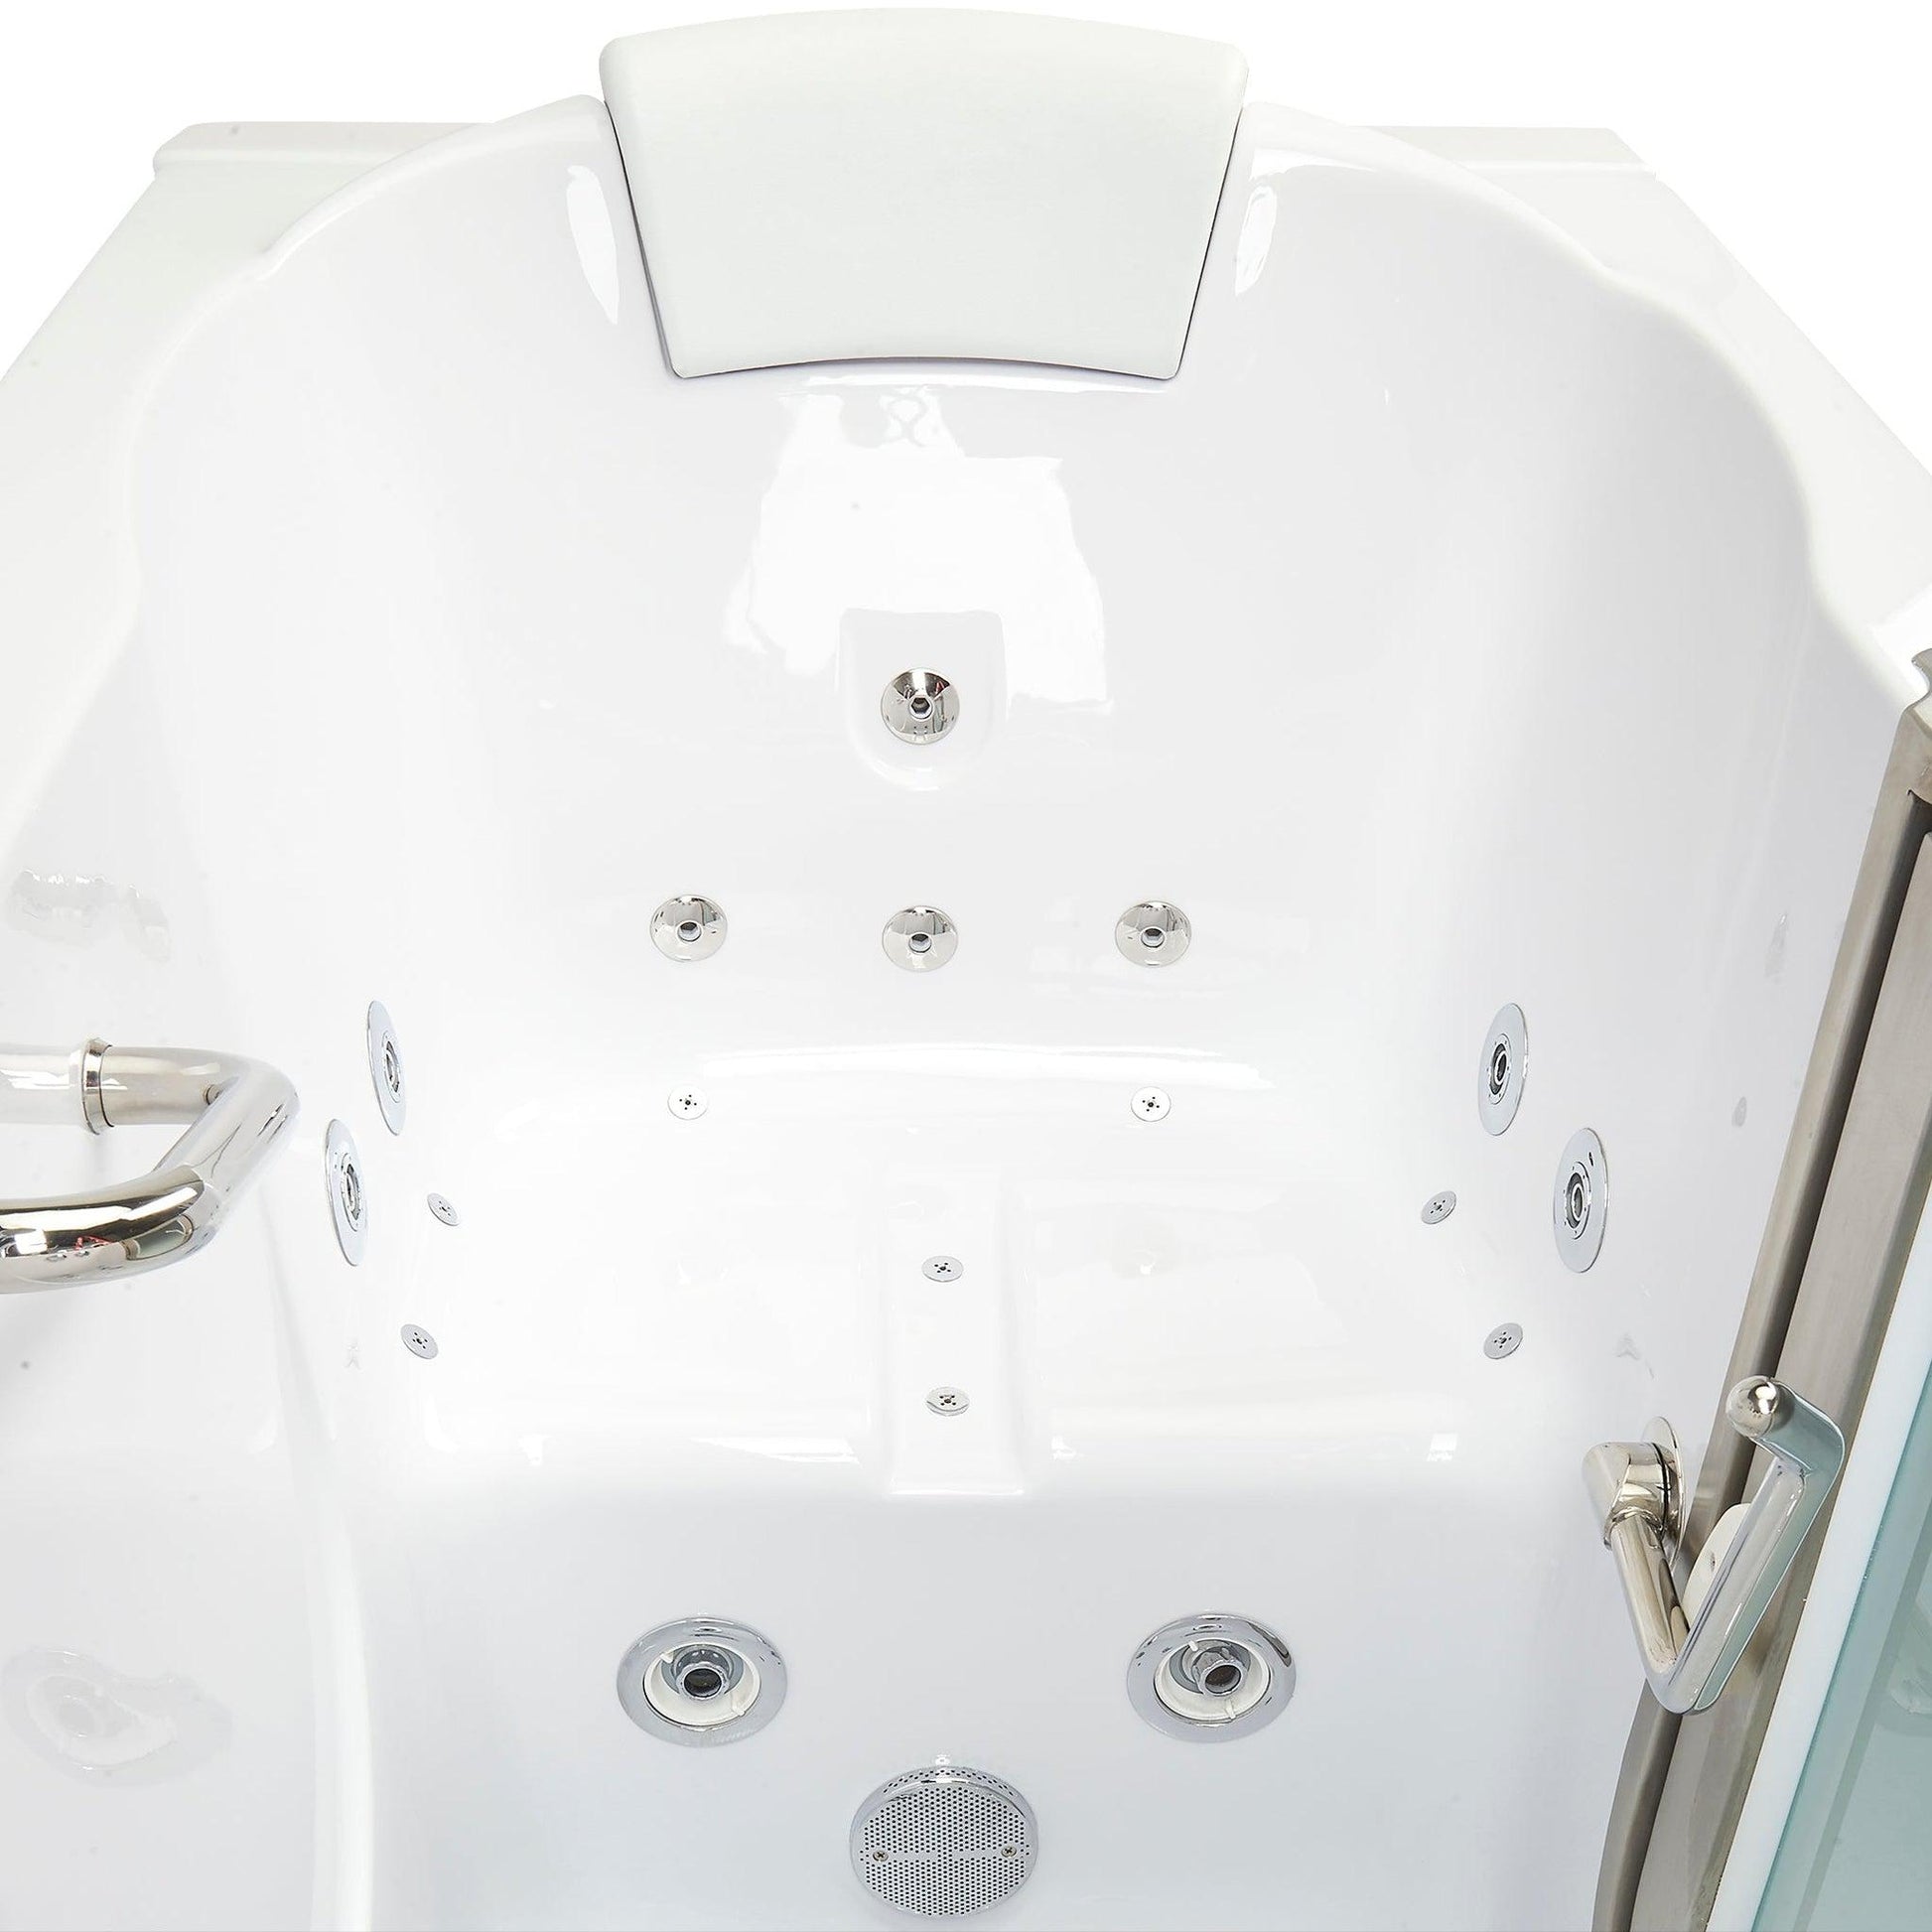 Ella's Bubbles Deluxe 30" x 55" White Acrylic Air and Hydro Massage Walk-In Bathtub With 5-Piece Fast Fill Faucet, 2" Dual Drain and Left Inward Swing Door